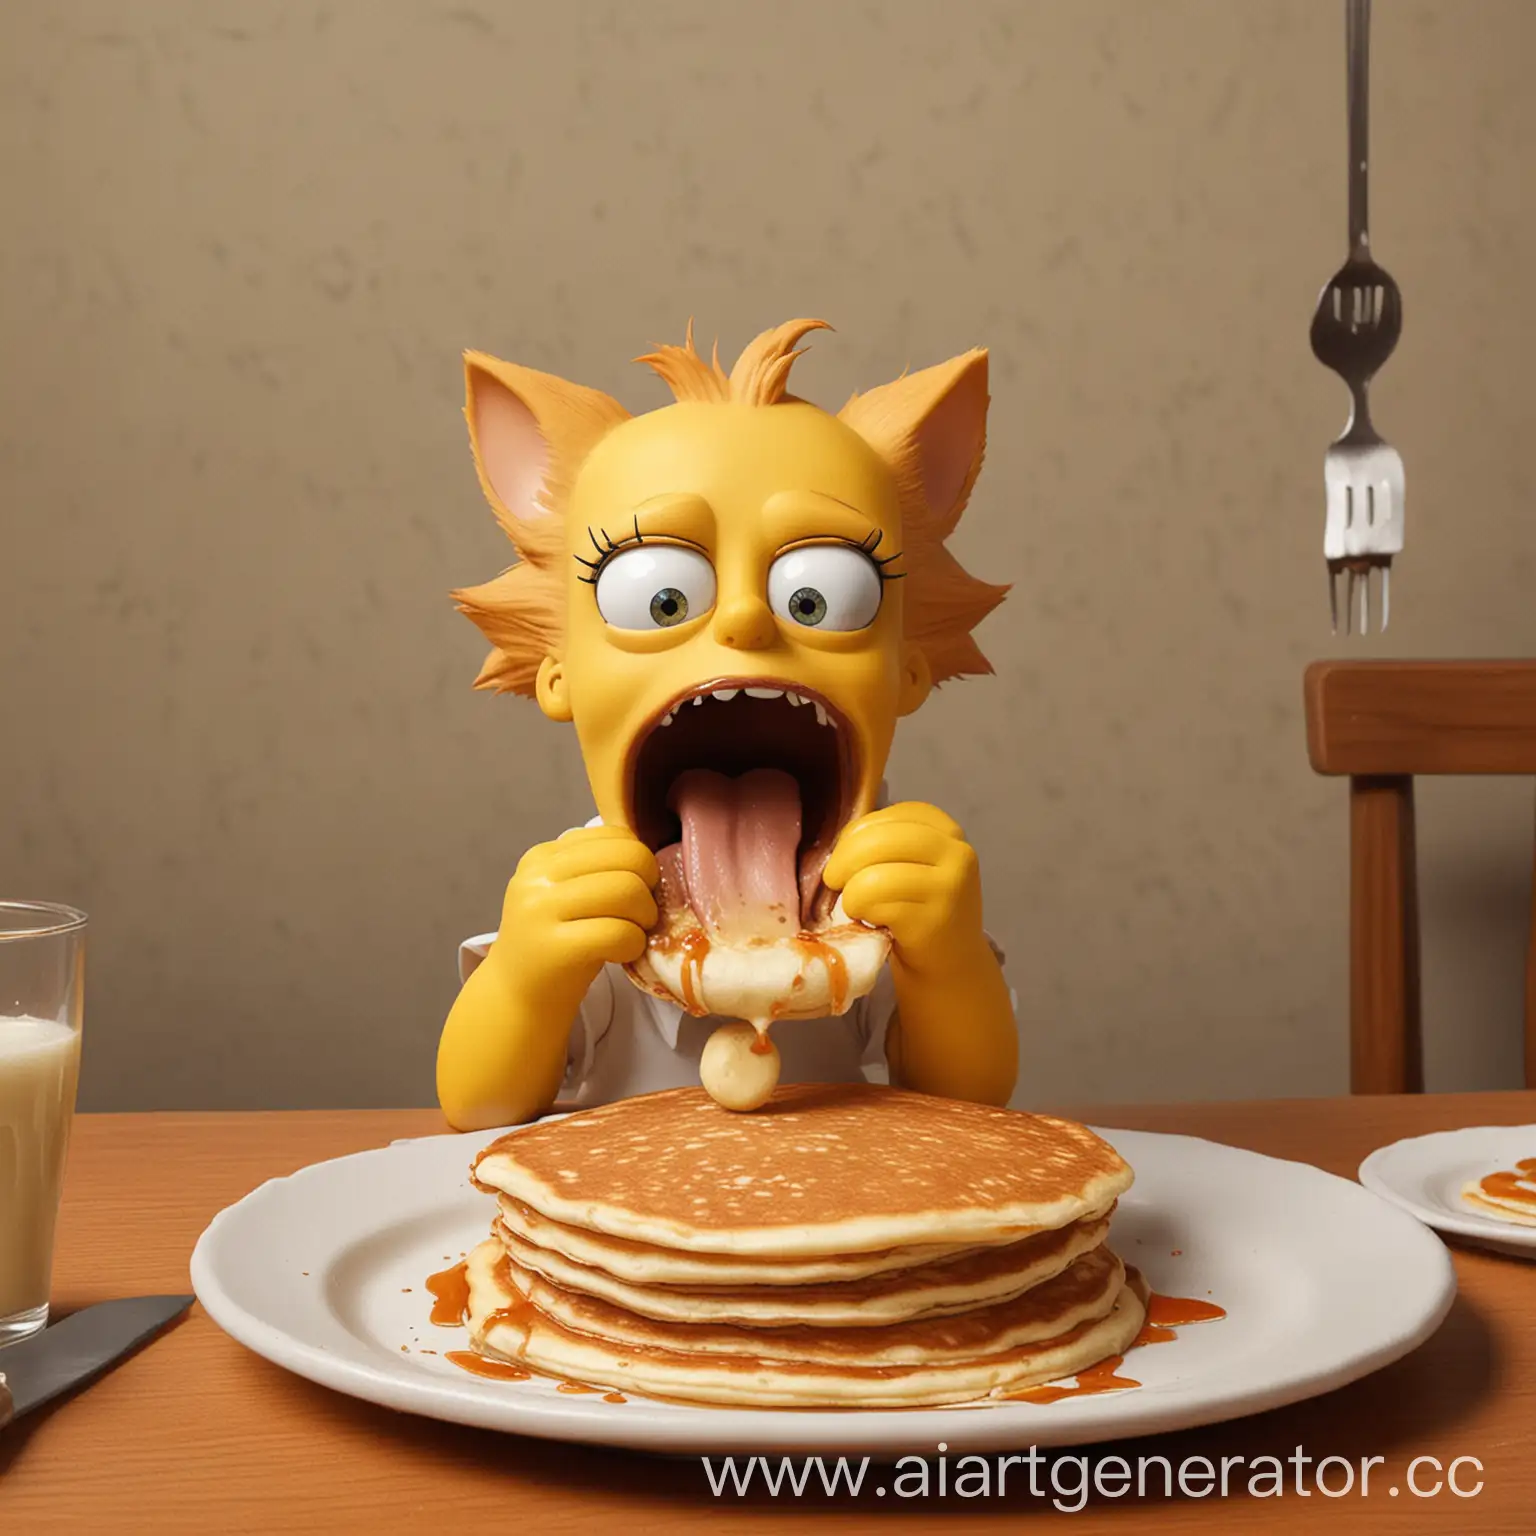 Cat-Eating-Rolled-Pancake-in-a-Playful-Scene